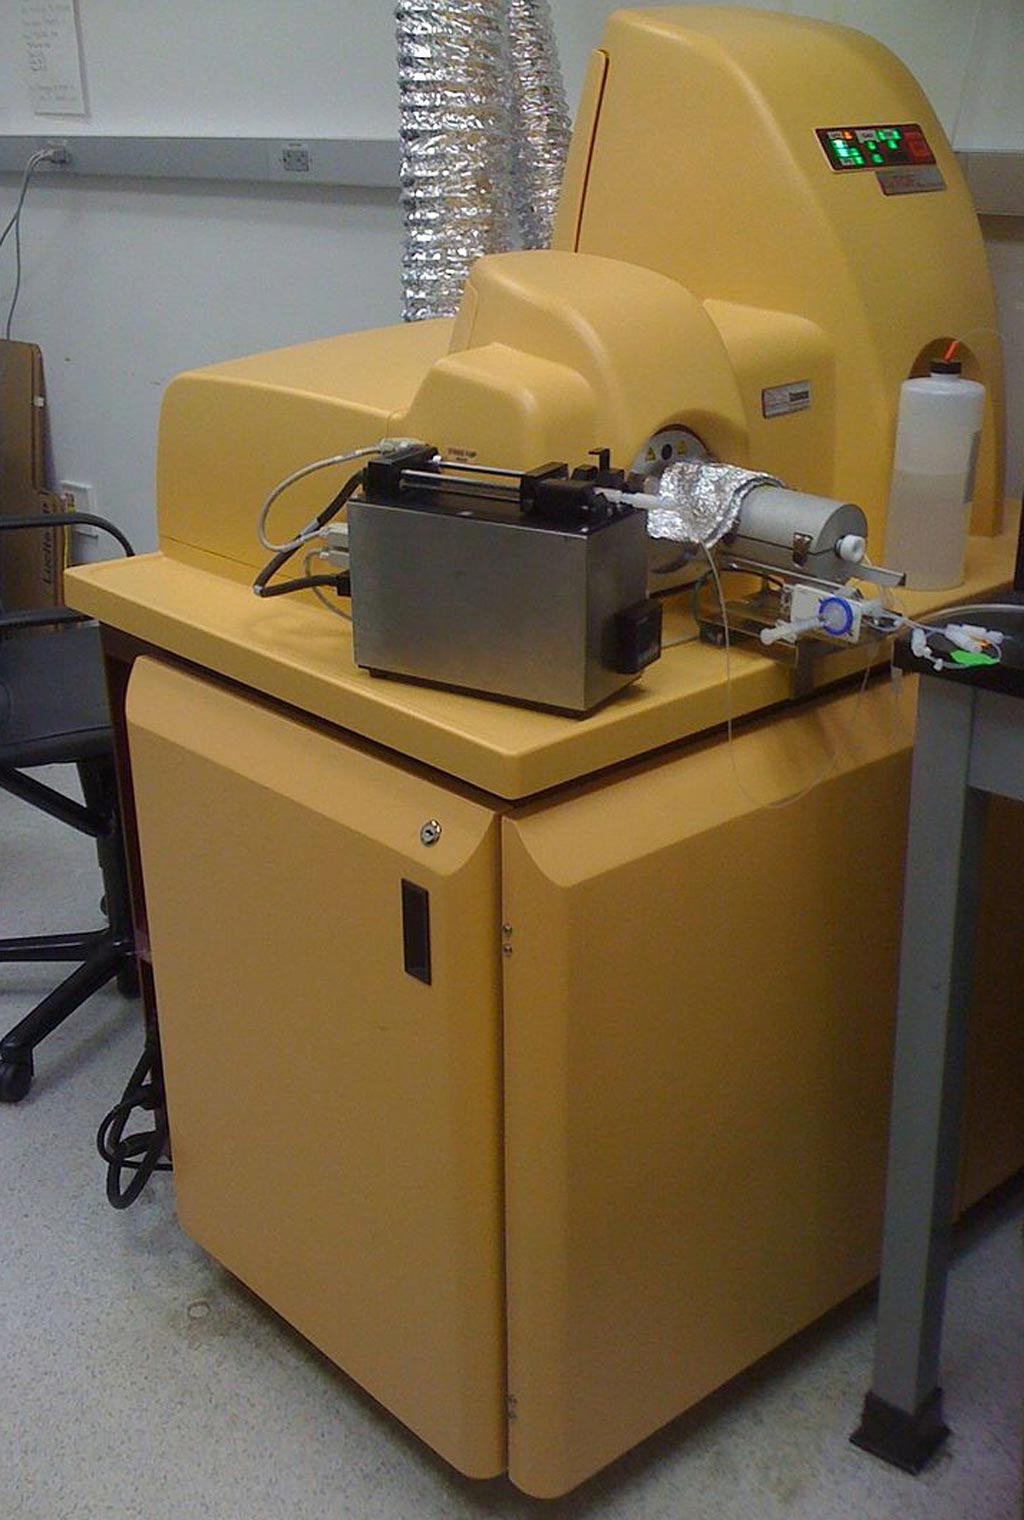 Image: A CyTOF mass cytometer (Photo courtesy of Wikimedia Commons).